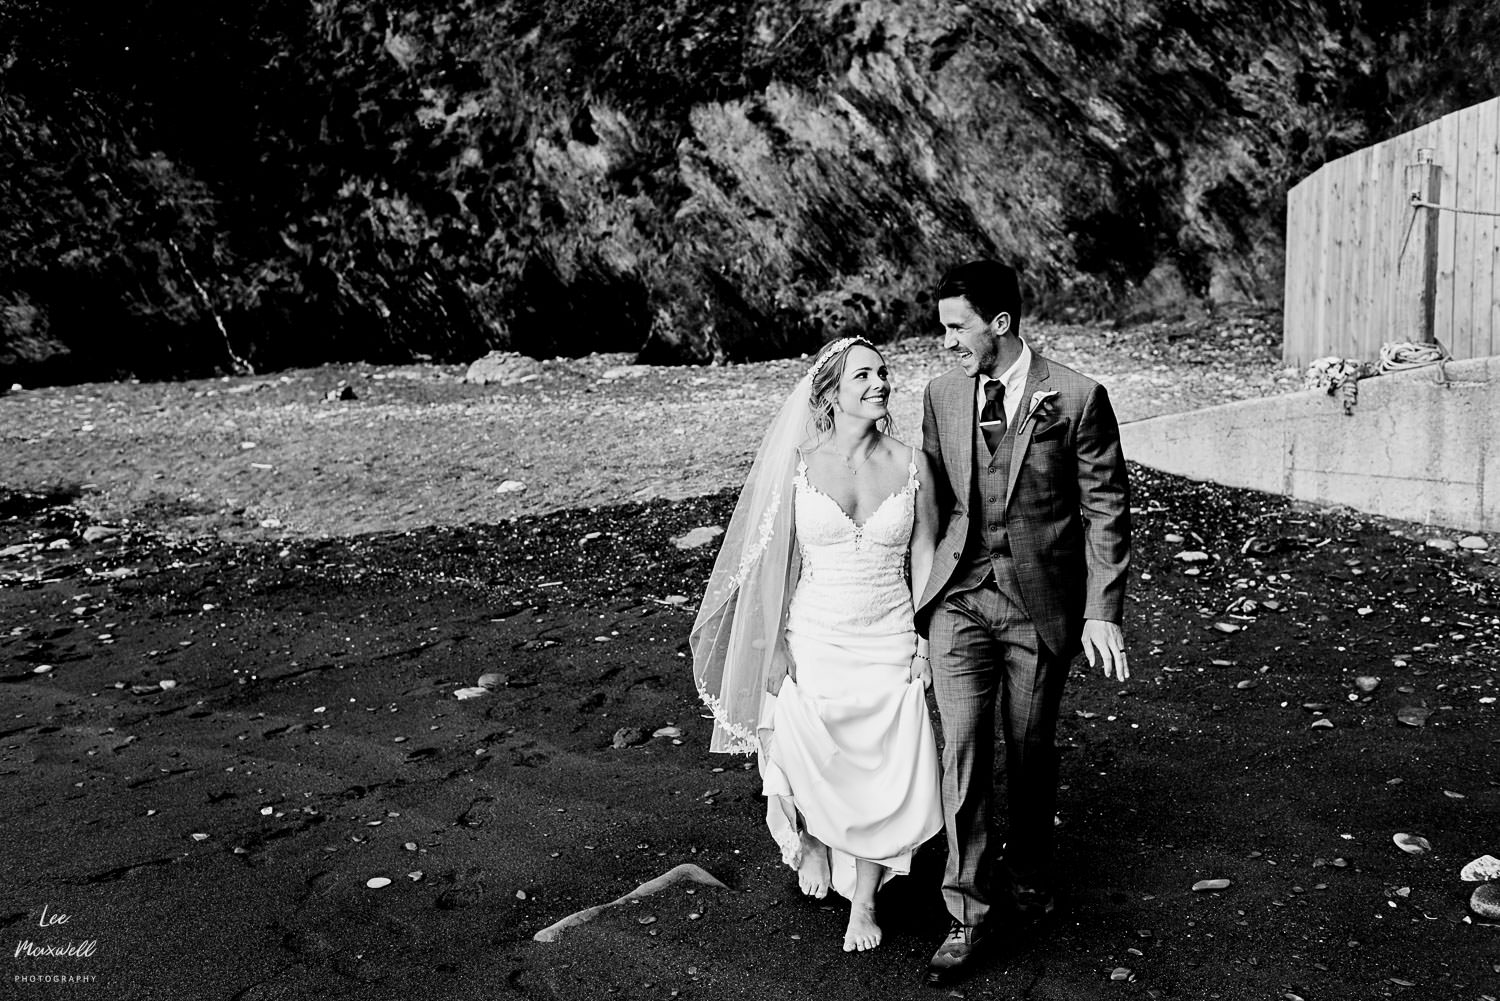 Relaxed wedding portrait at Tunnels Beaches